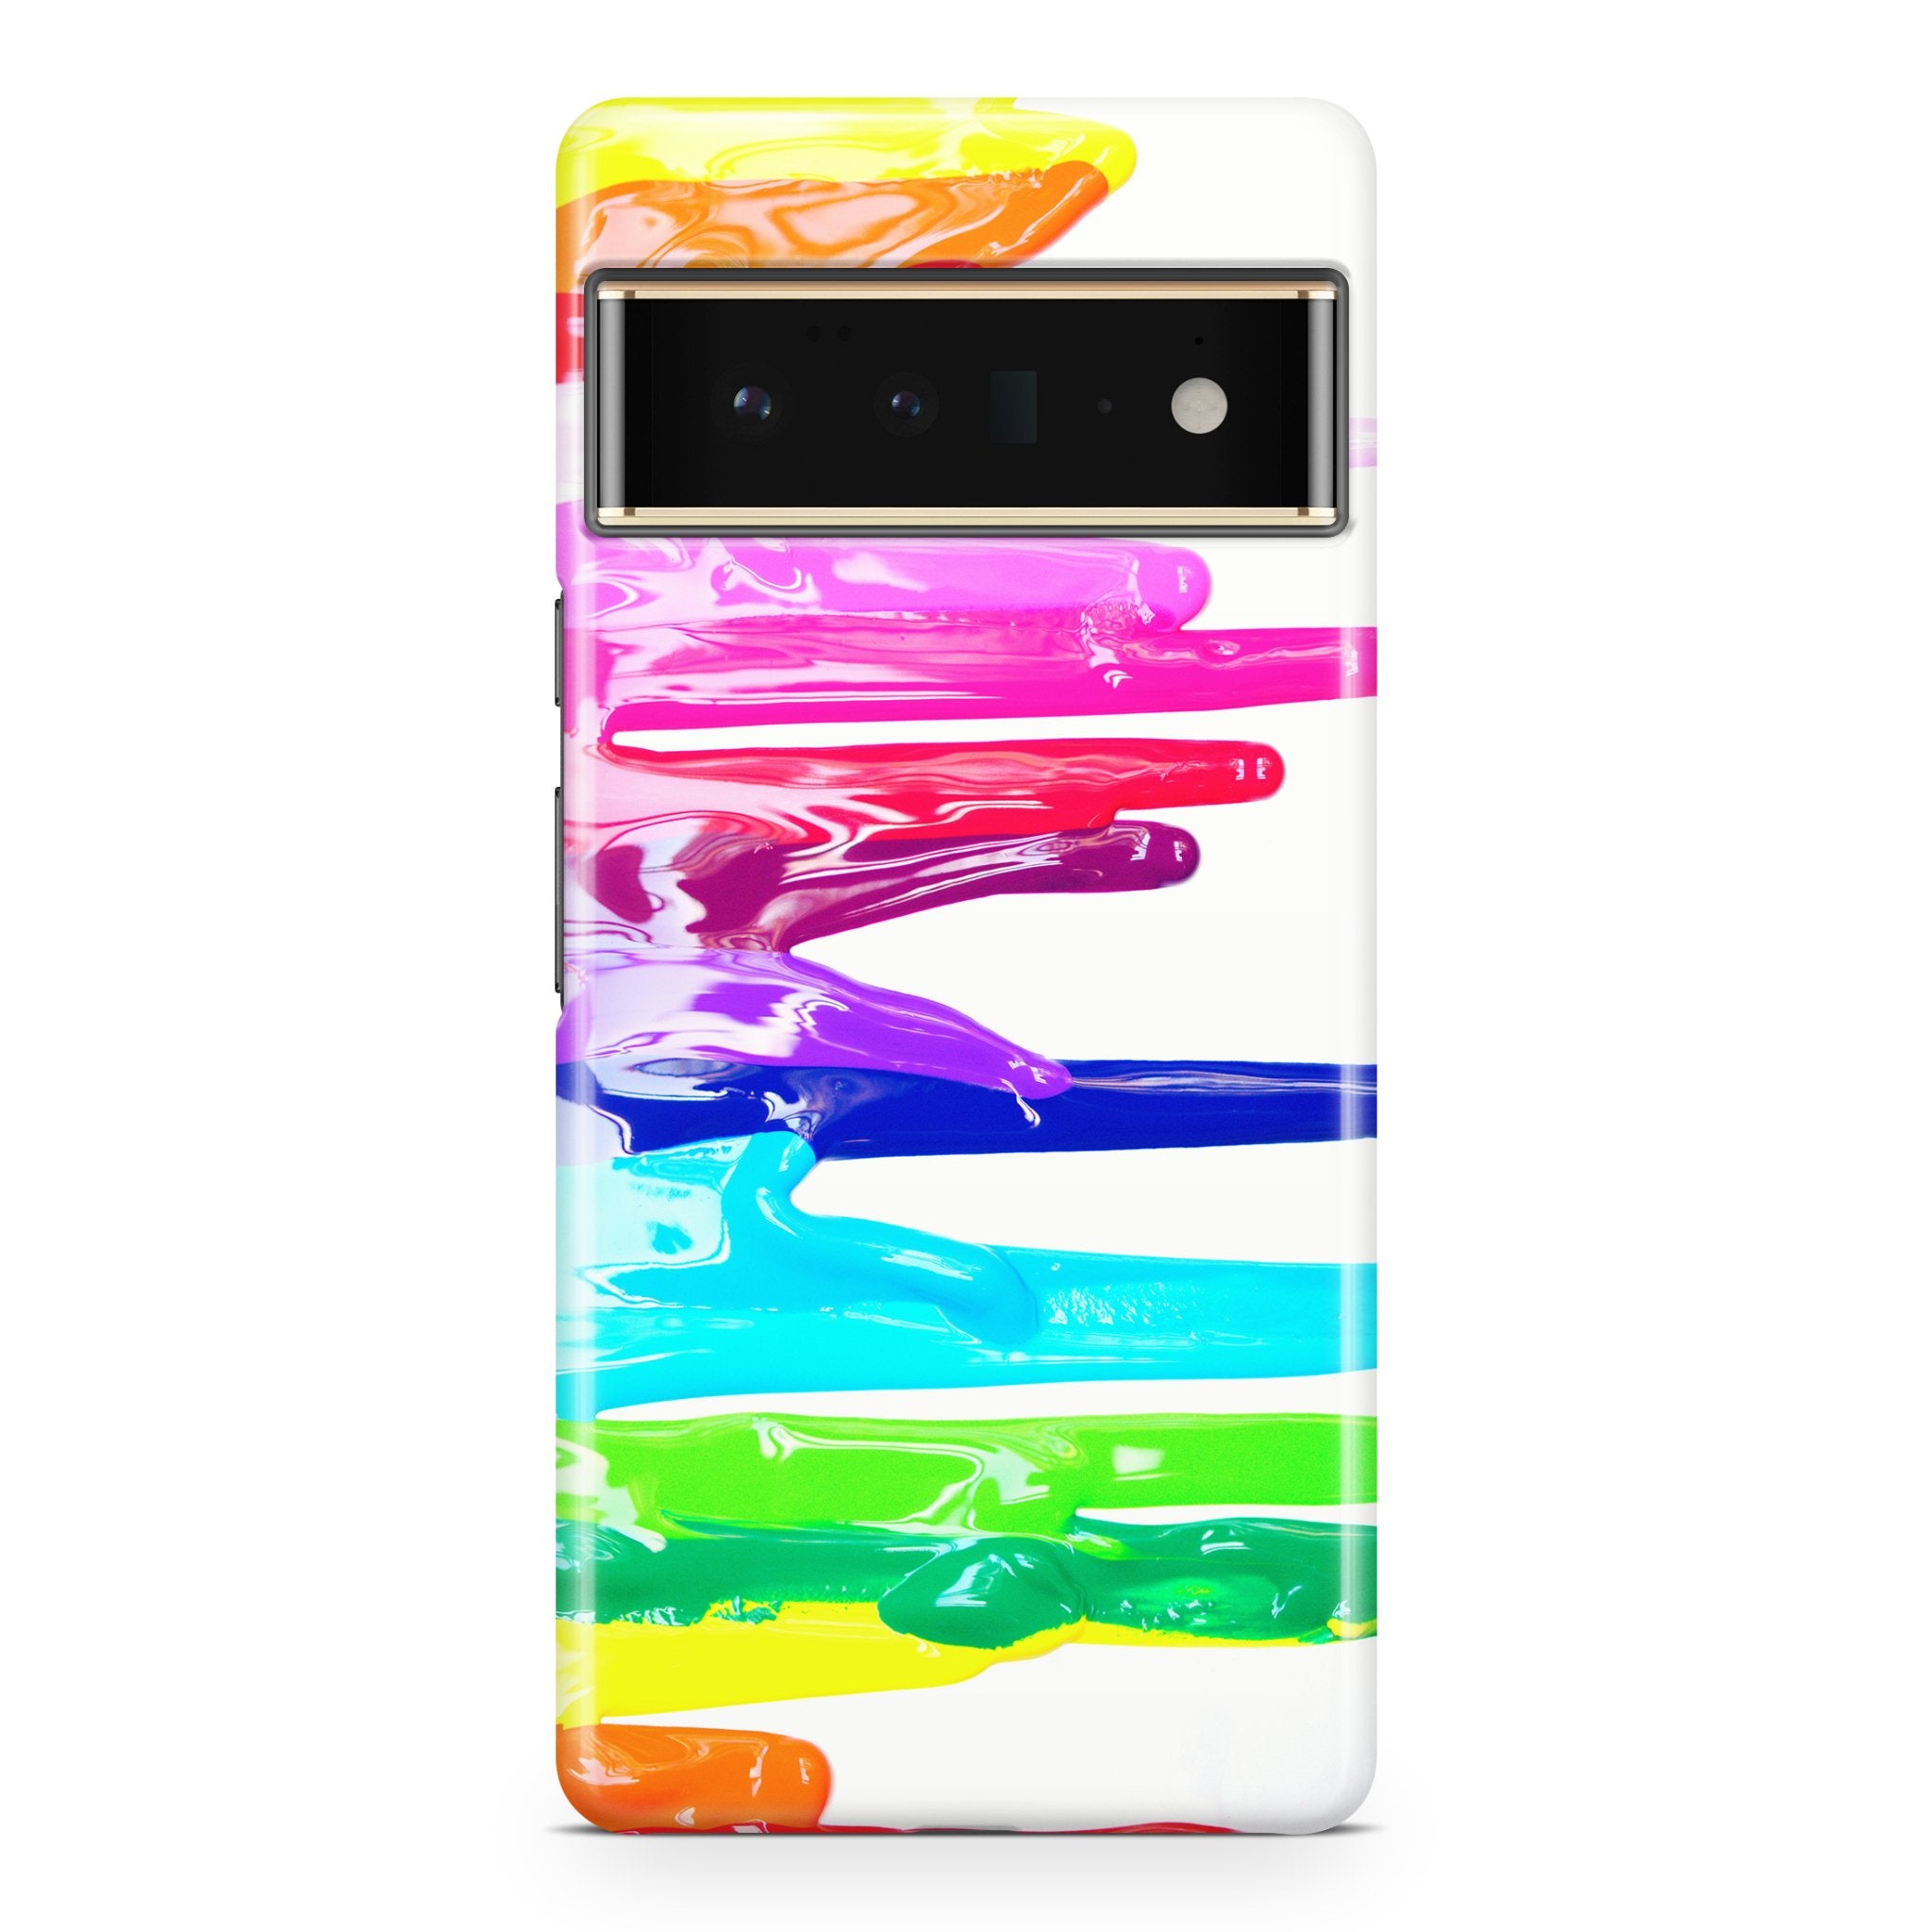 Color Bleed - Google phone case designs by CaseSwagger